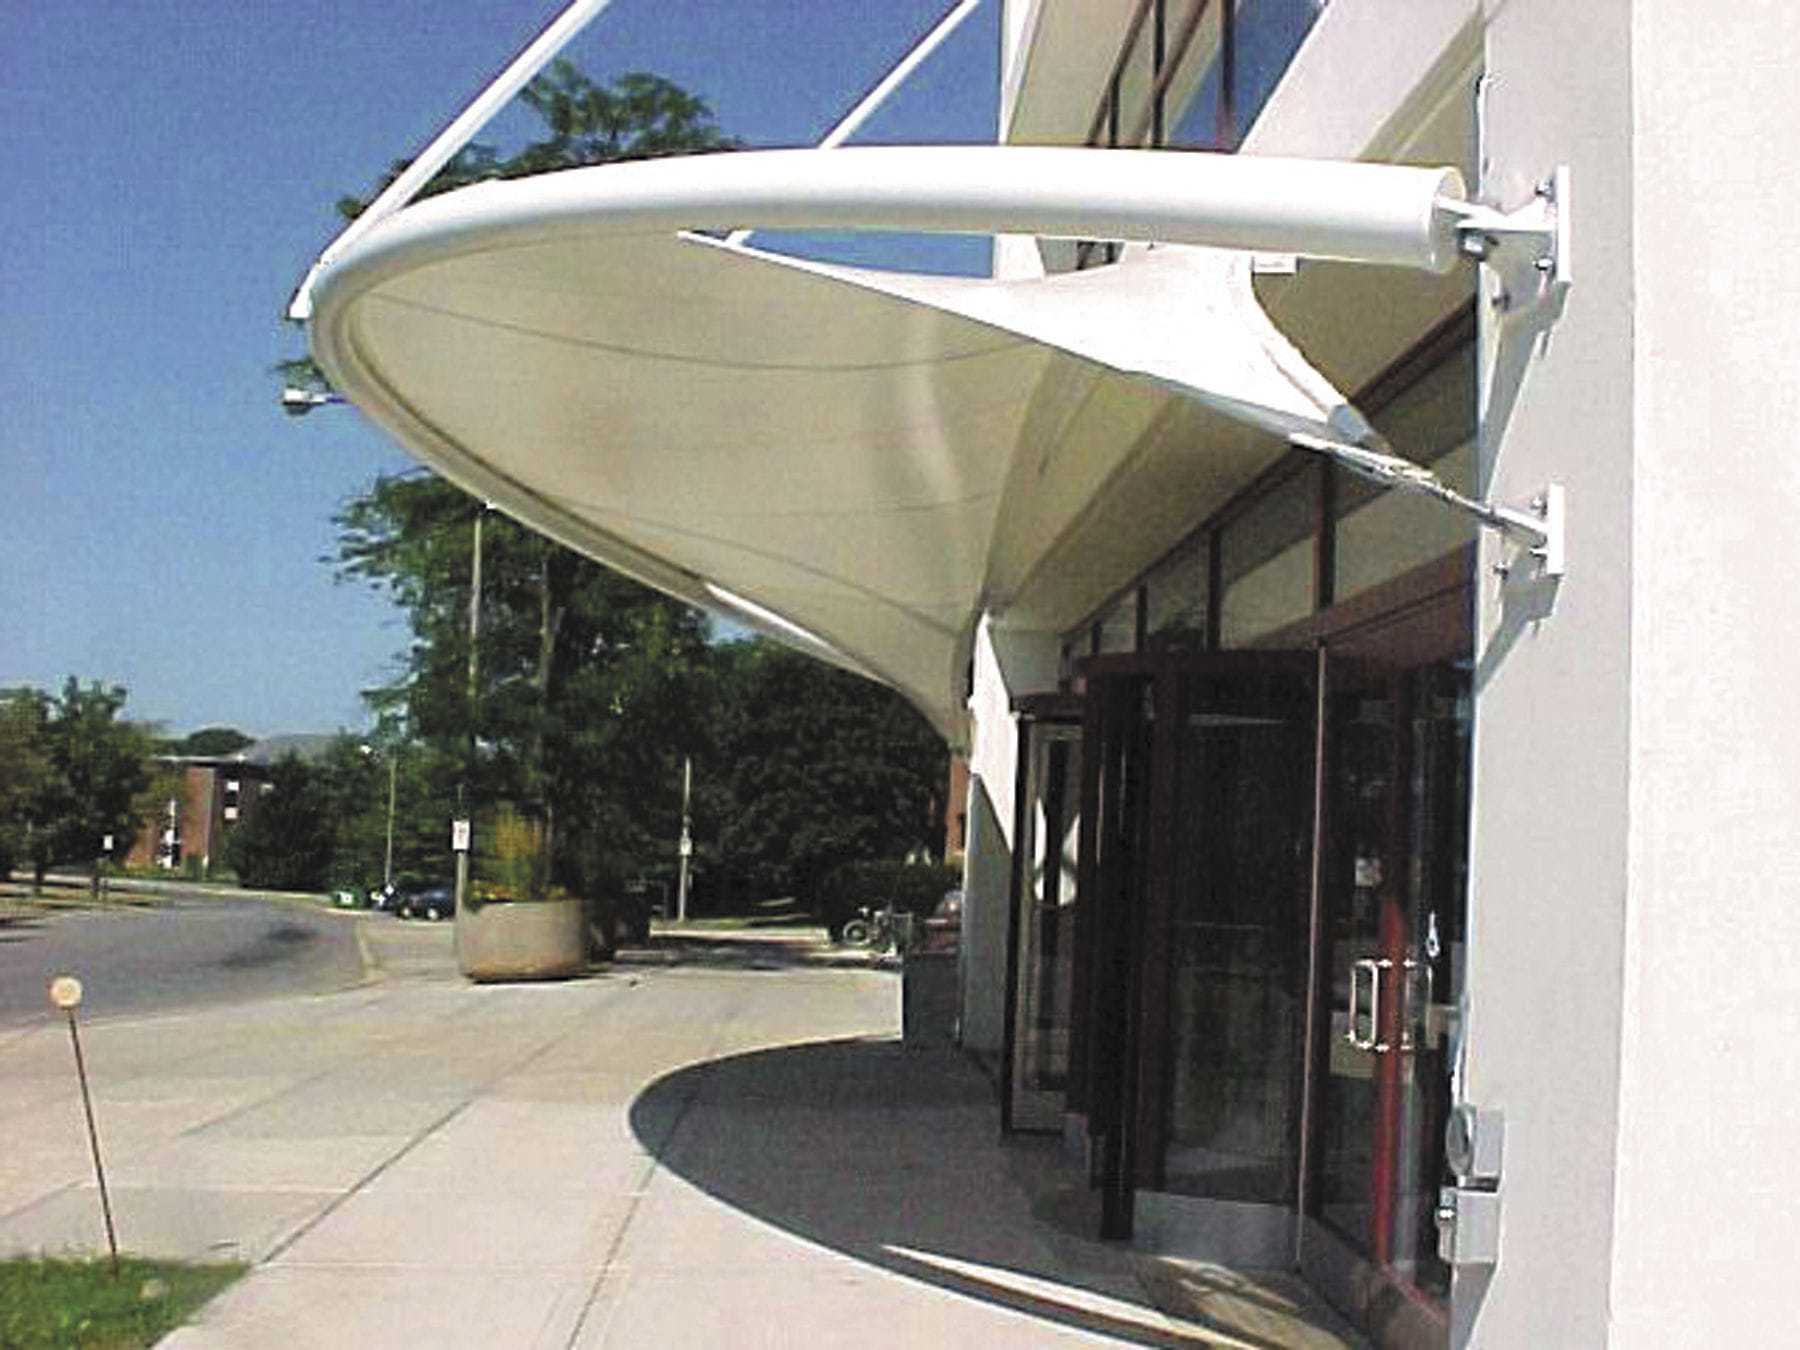 Entrance Canopy Structures.